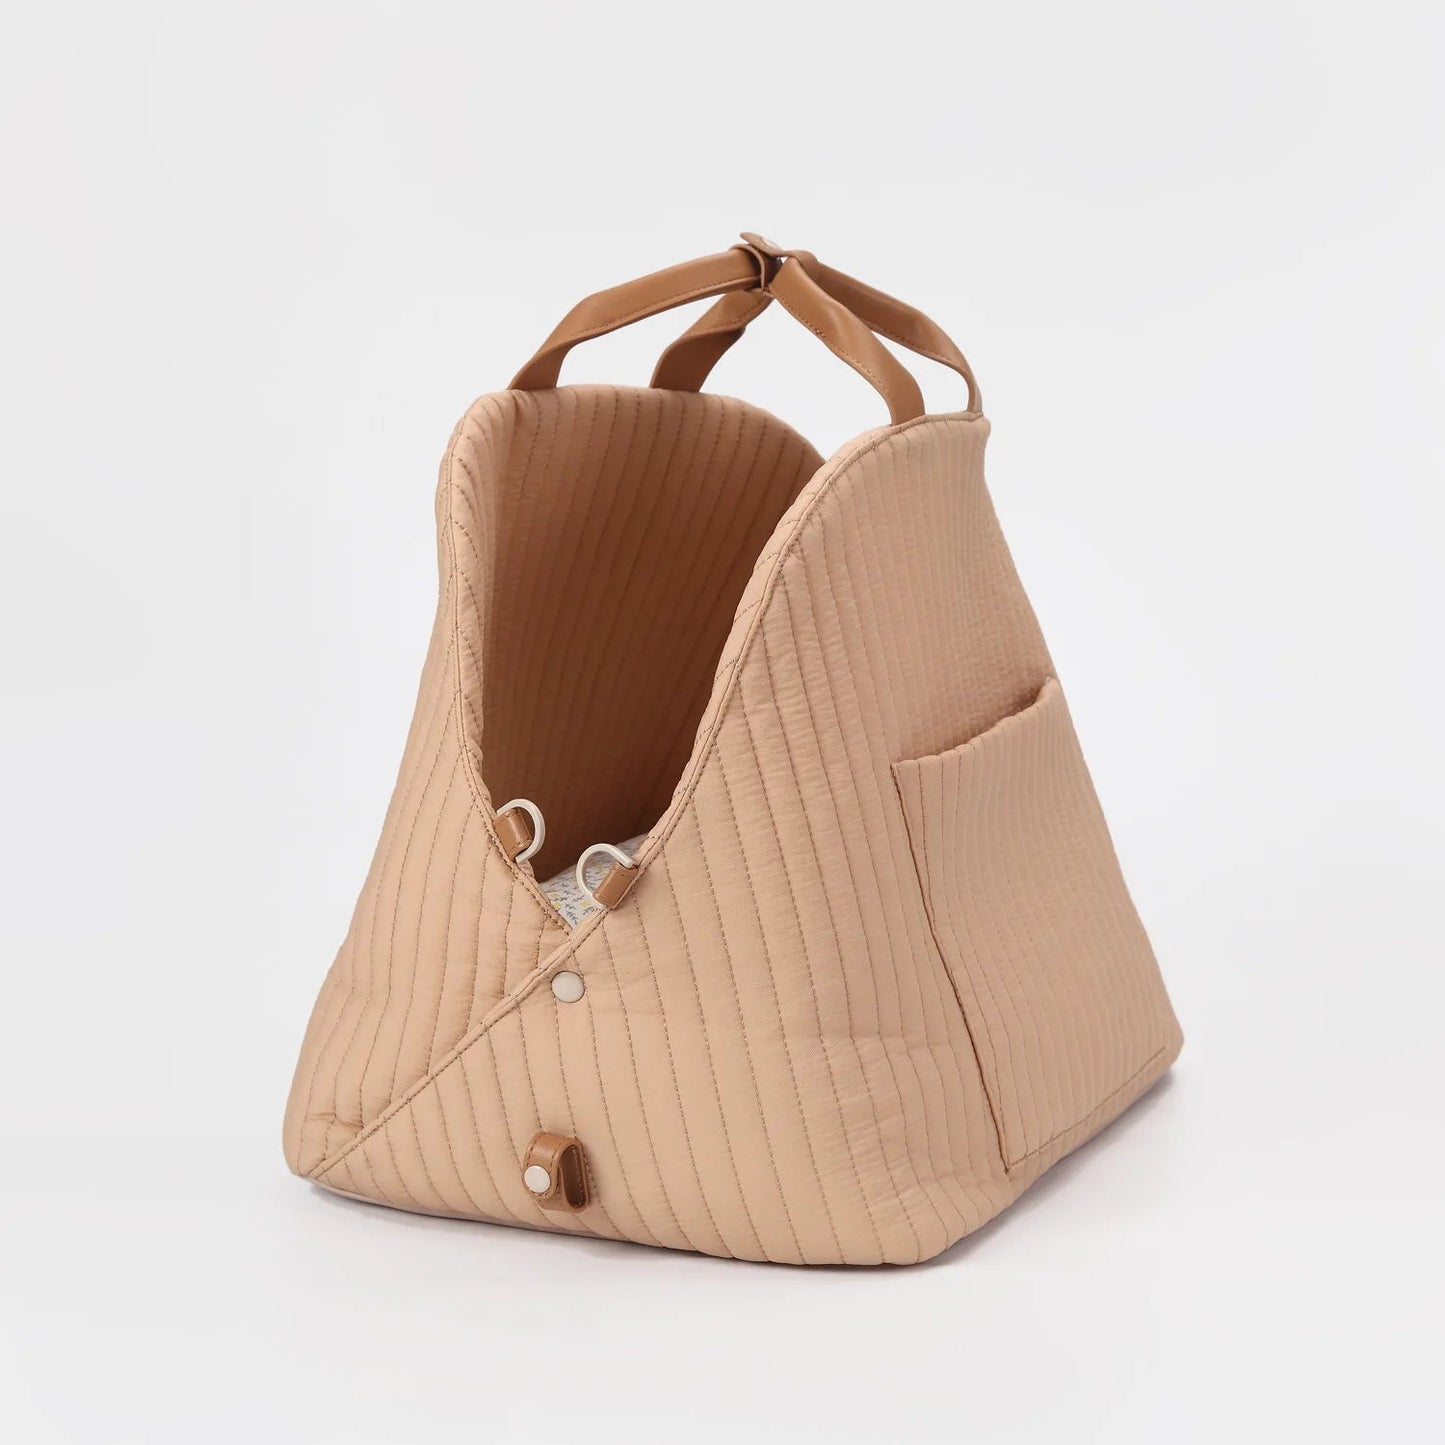 Travel-friendly khaki color luxury cat carrier with elegant PU leather handle and vertical quilting detail